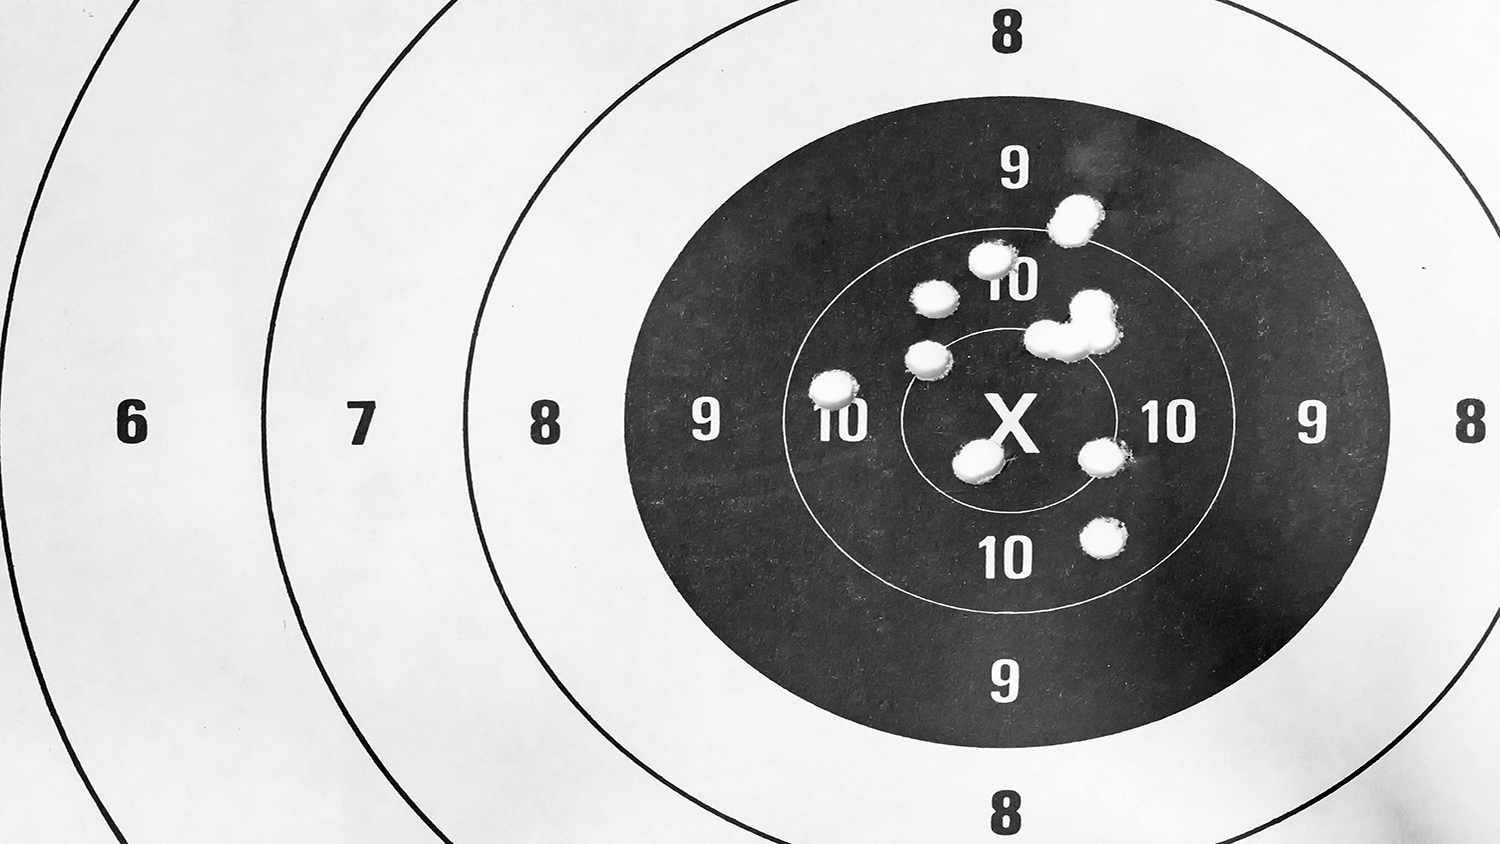 4 Common Shooting Mistakes and How to Correct Them